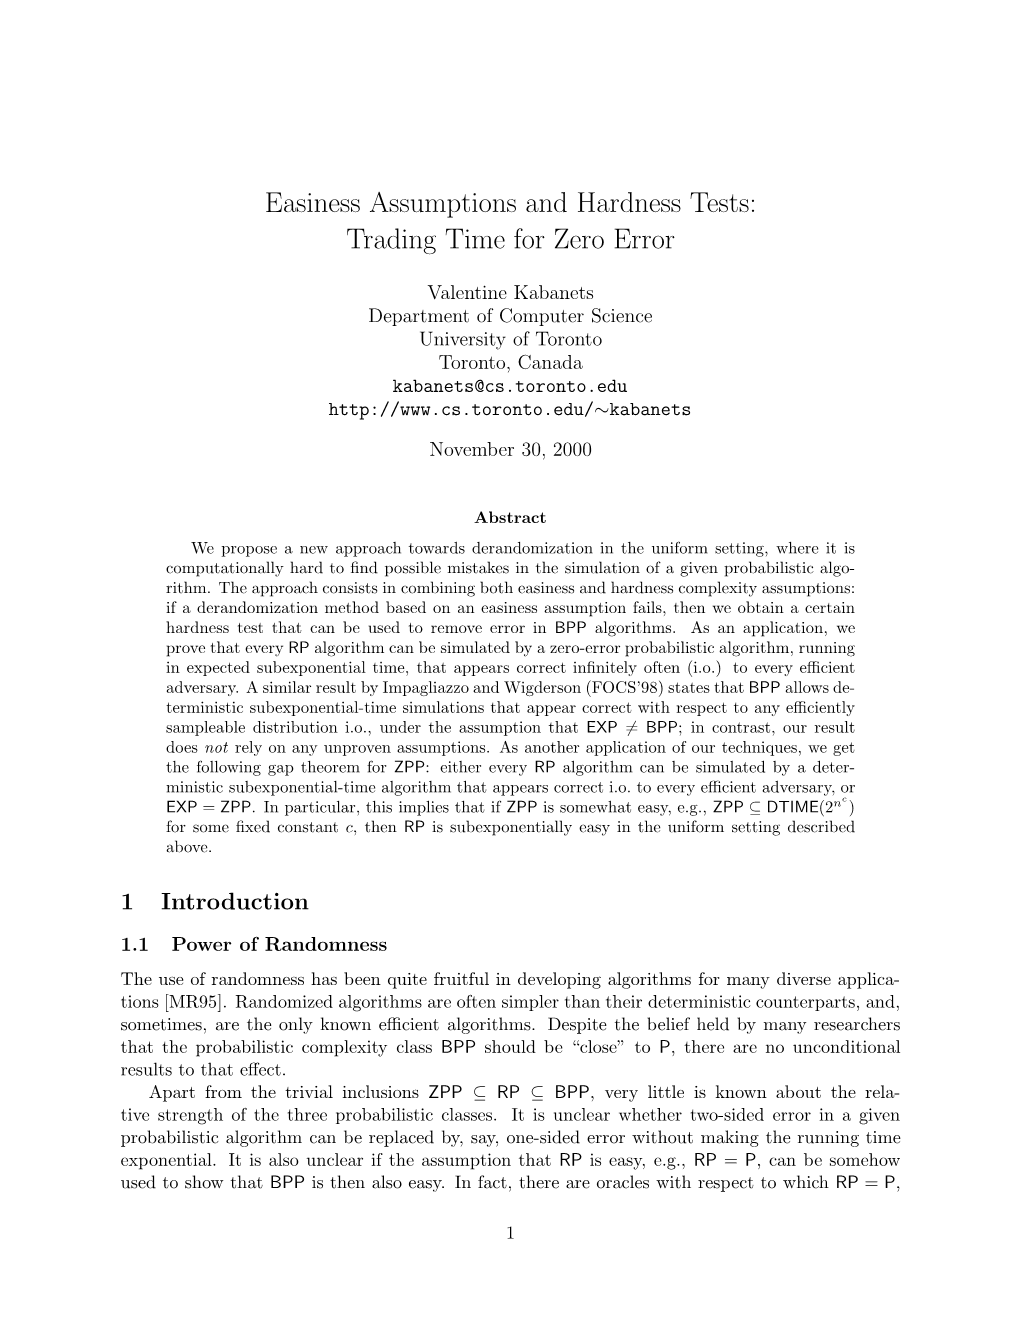 Easiness Assumptions and Hardness Tests: Trading Time for Zero Error